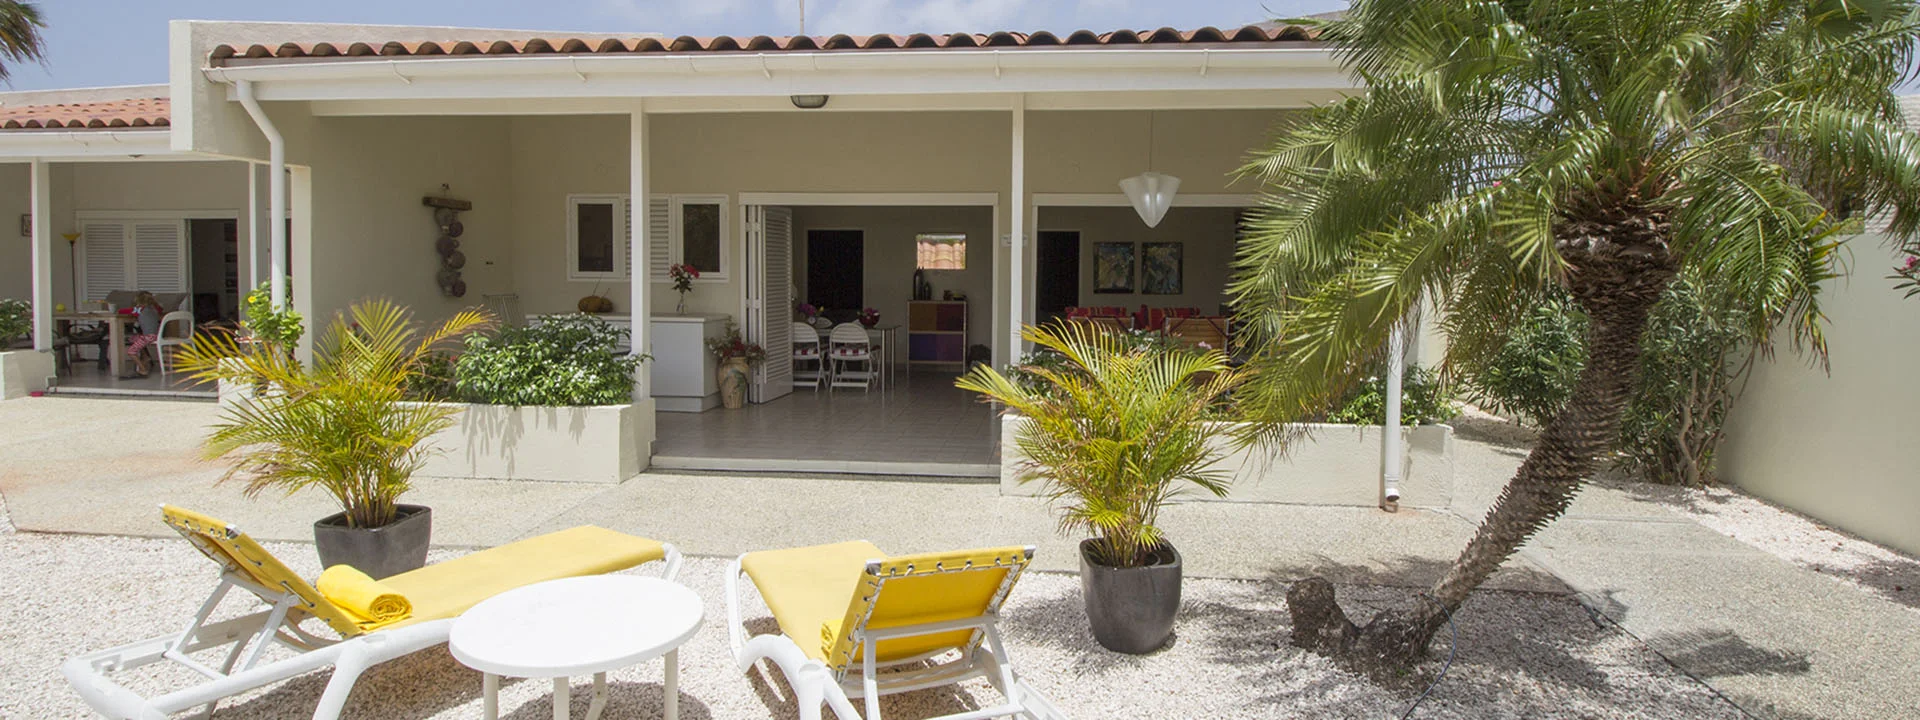 Waterfront bungalow Jan Sofat for rent Curacao